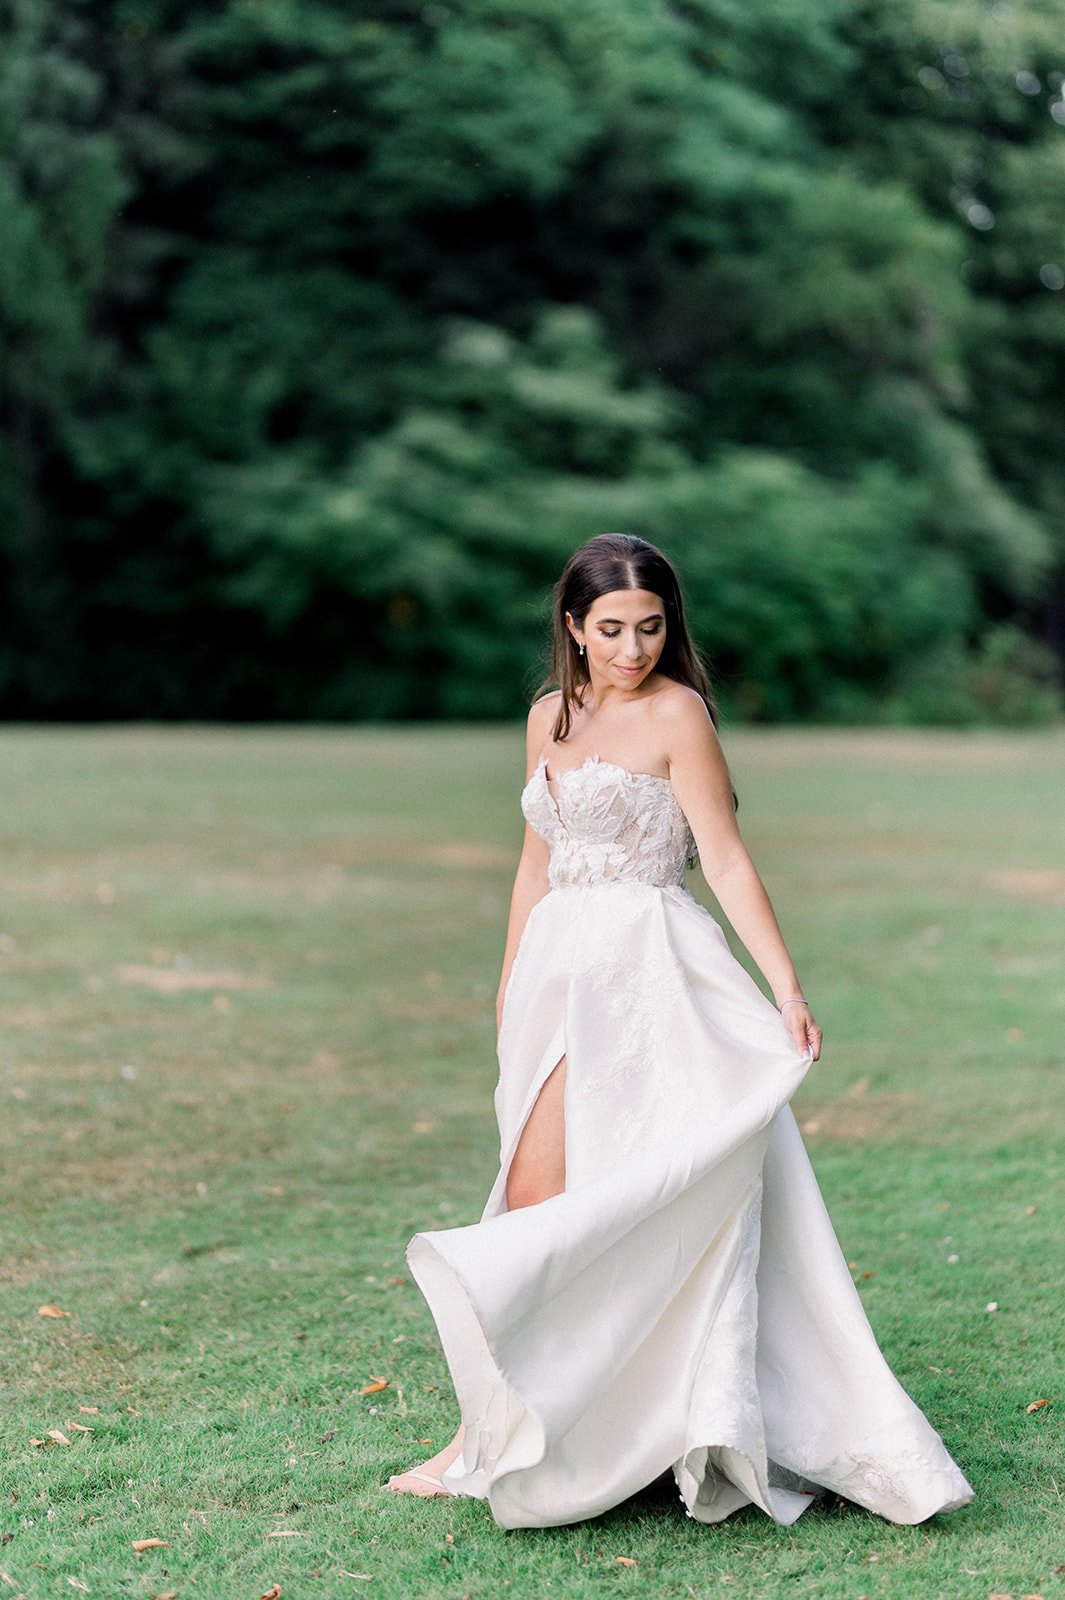 Bride twirls in ballgown on grassy field at Hart House in Vancouver, BC.